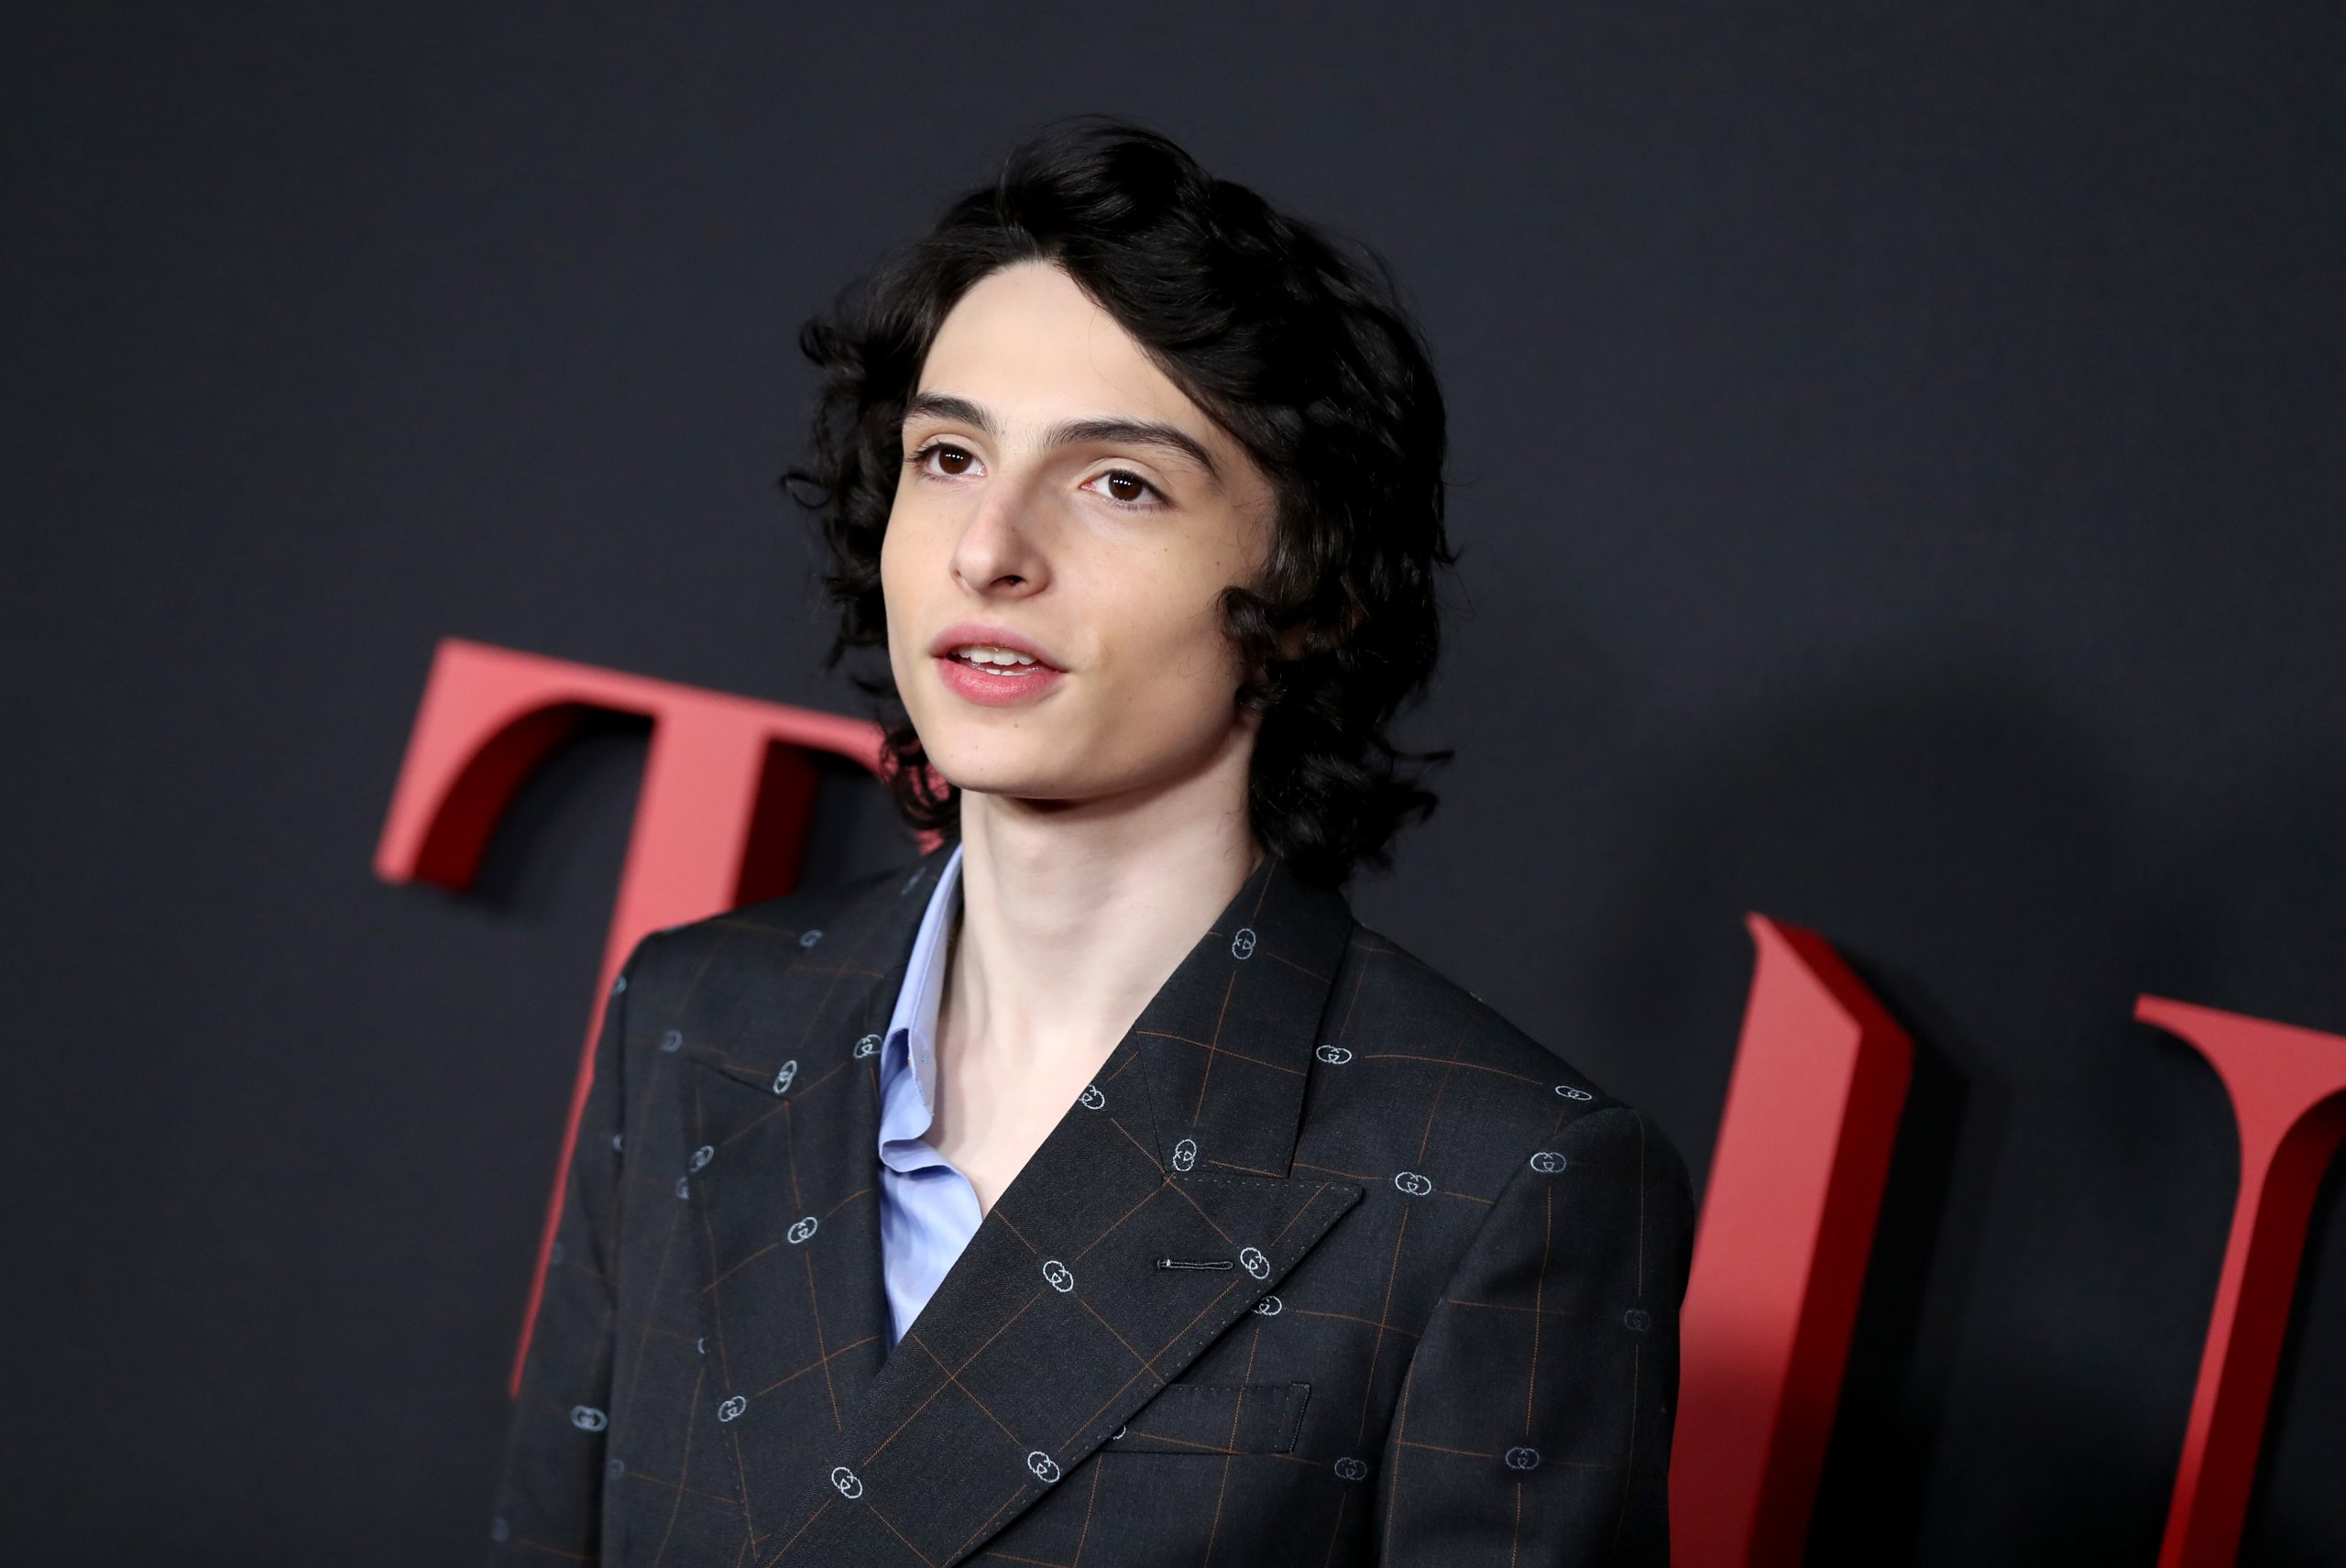 Does Finn Wolfhard Have A Tattoo?